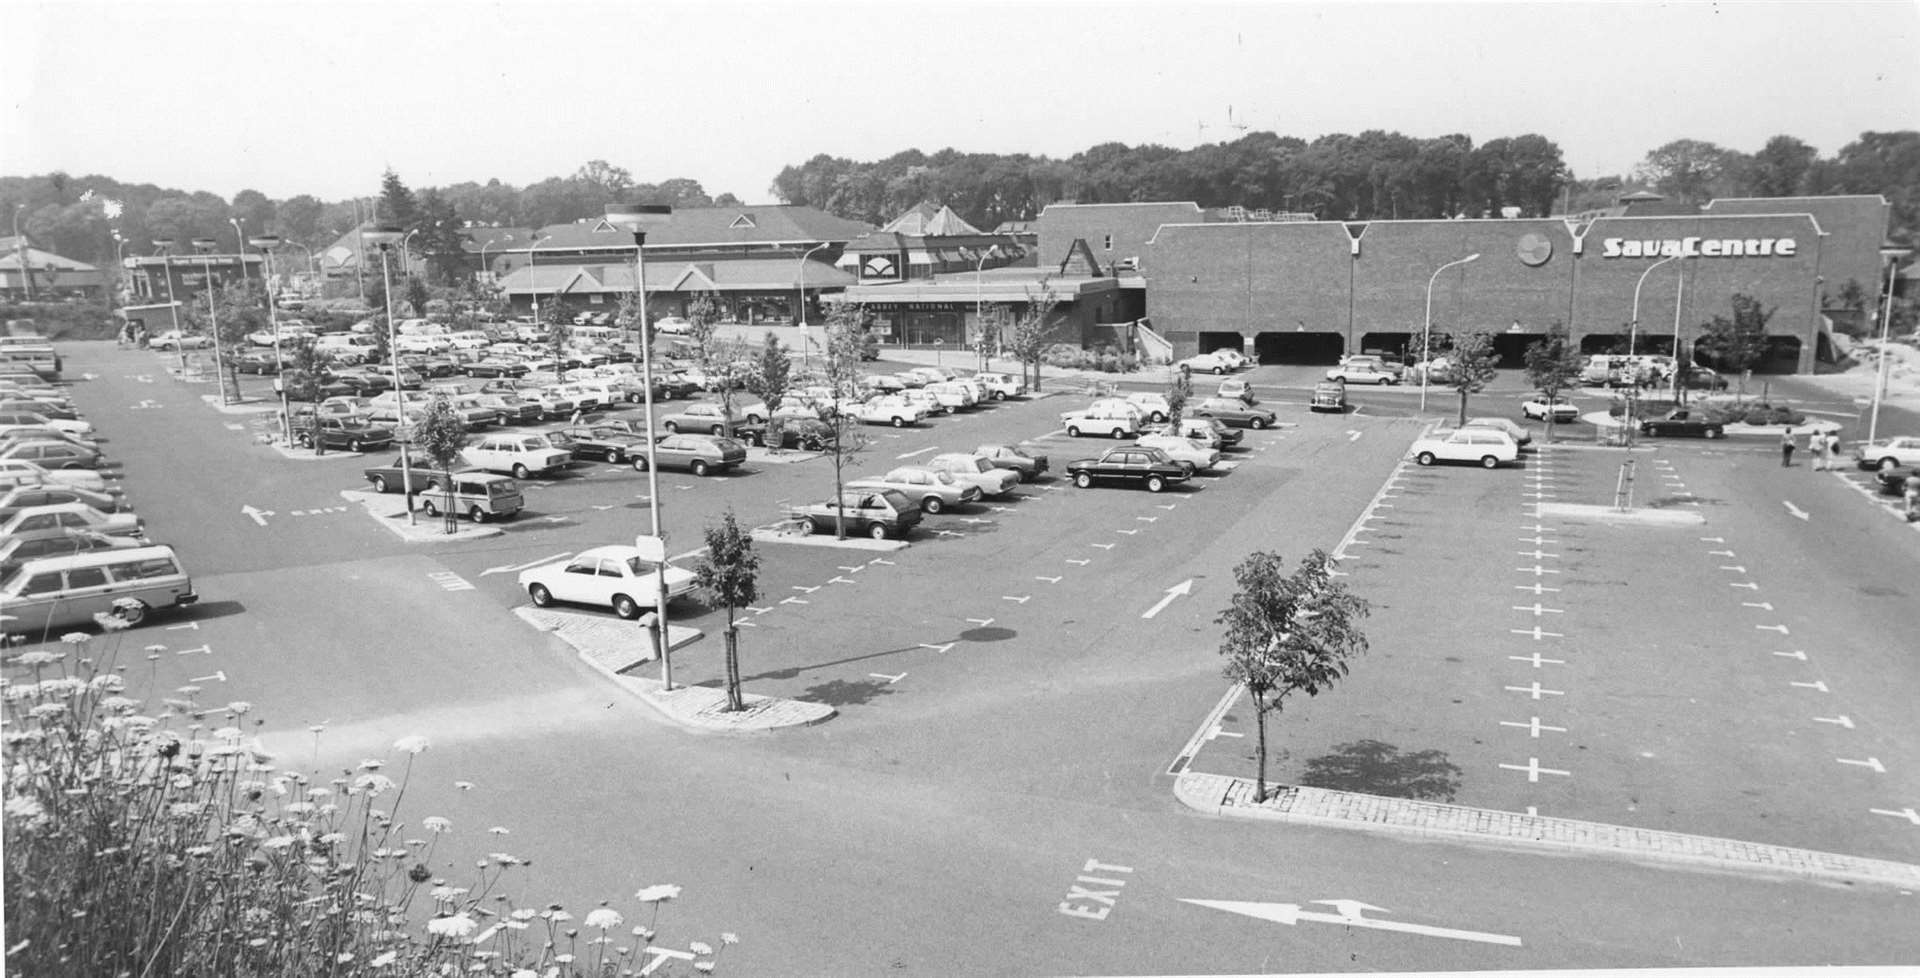 View of the former Sava Centre Shopping complex, now Hempstead Valley in Gillingham in July 1982